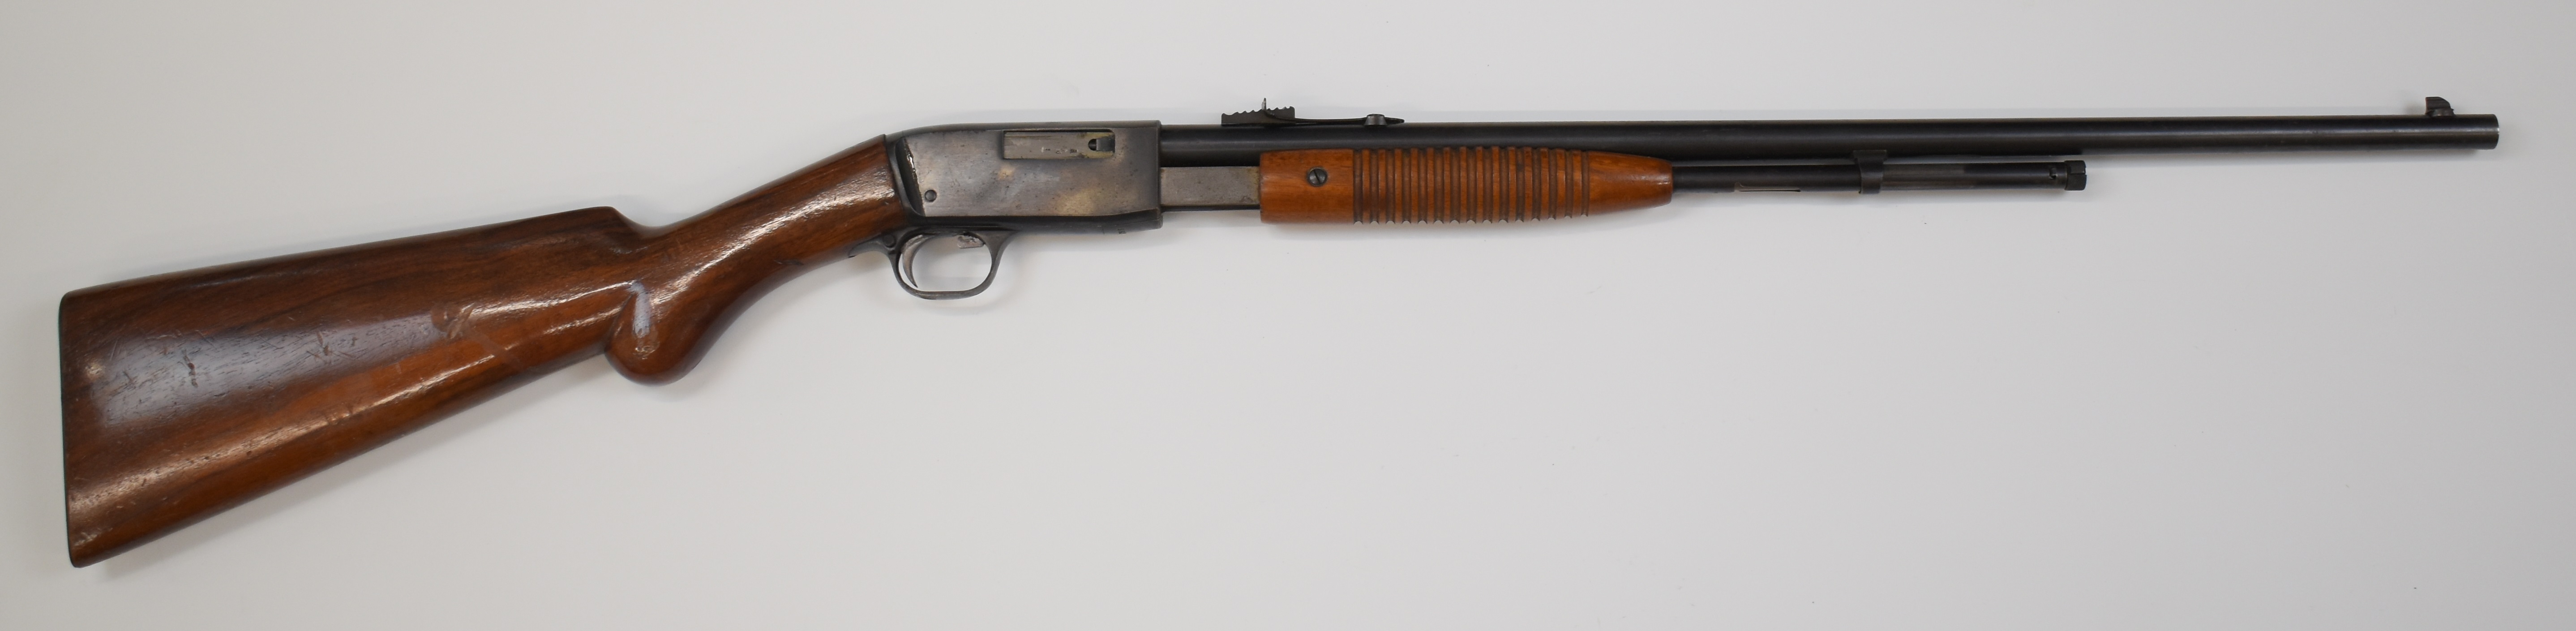 Browning .22 pump-action rifle with semi-pistol grip, adjustable sights and 21.5 inch barrel, - Image 2 of 9